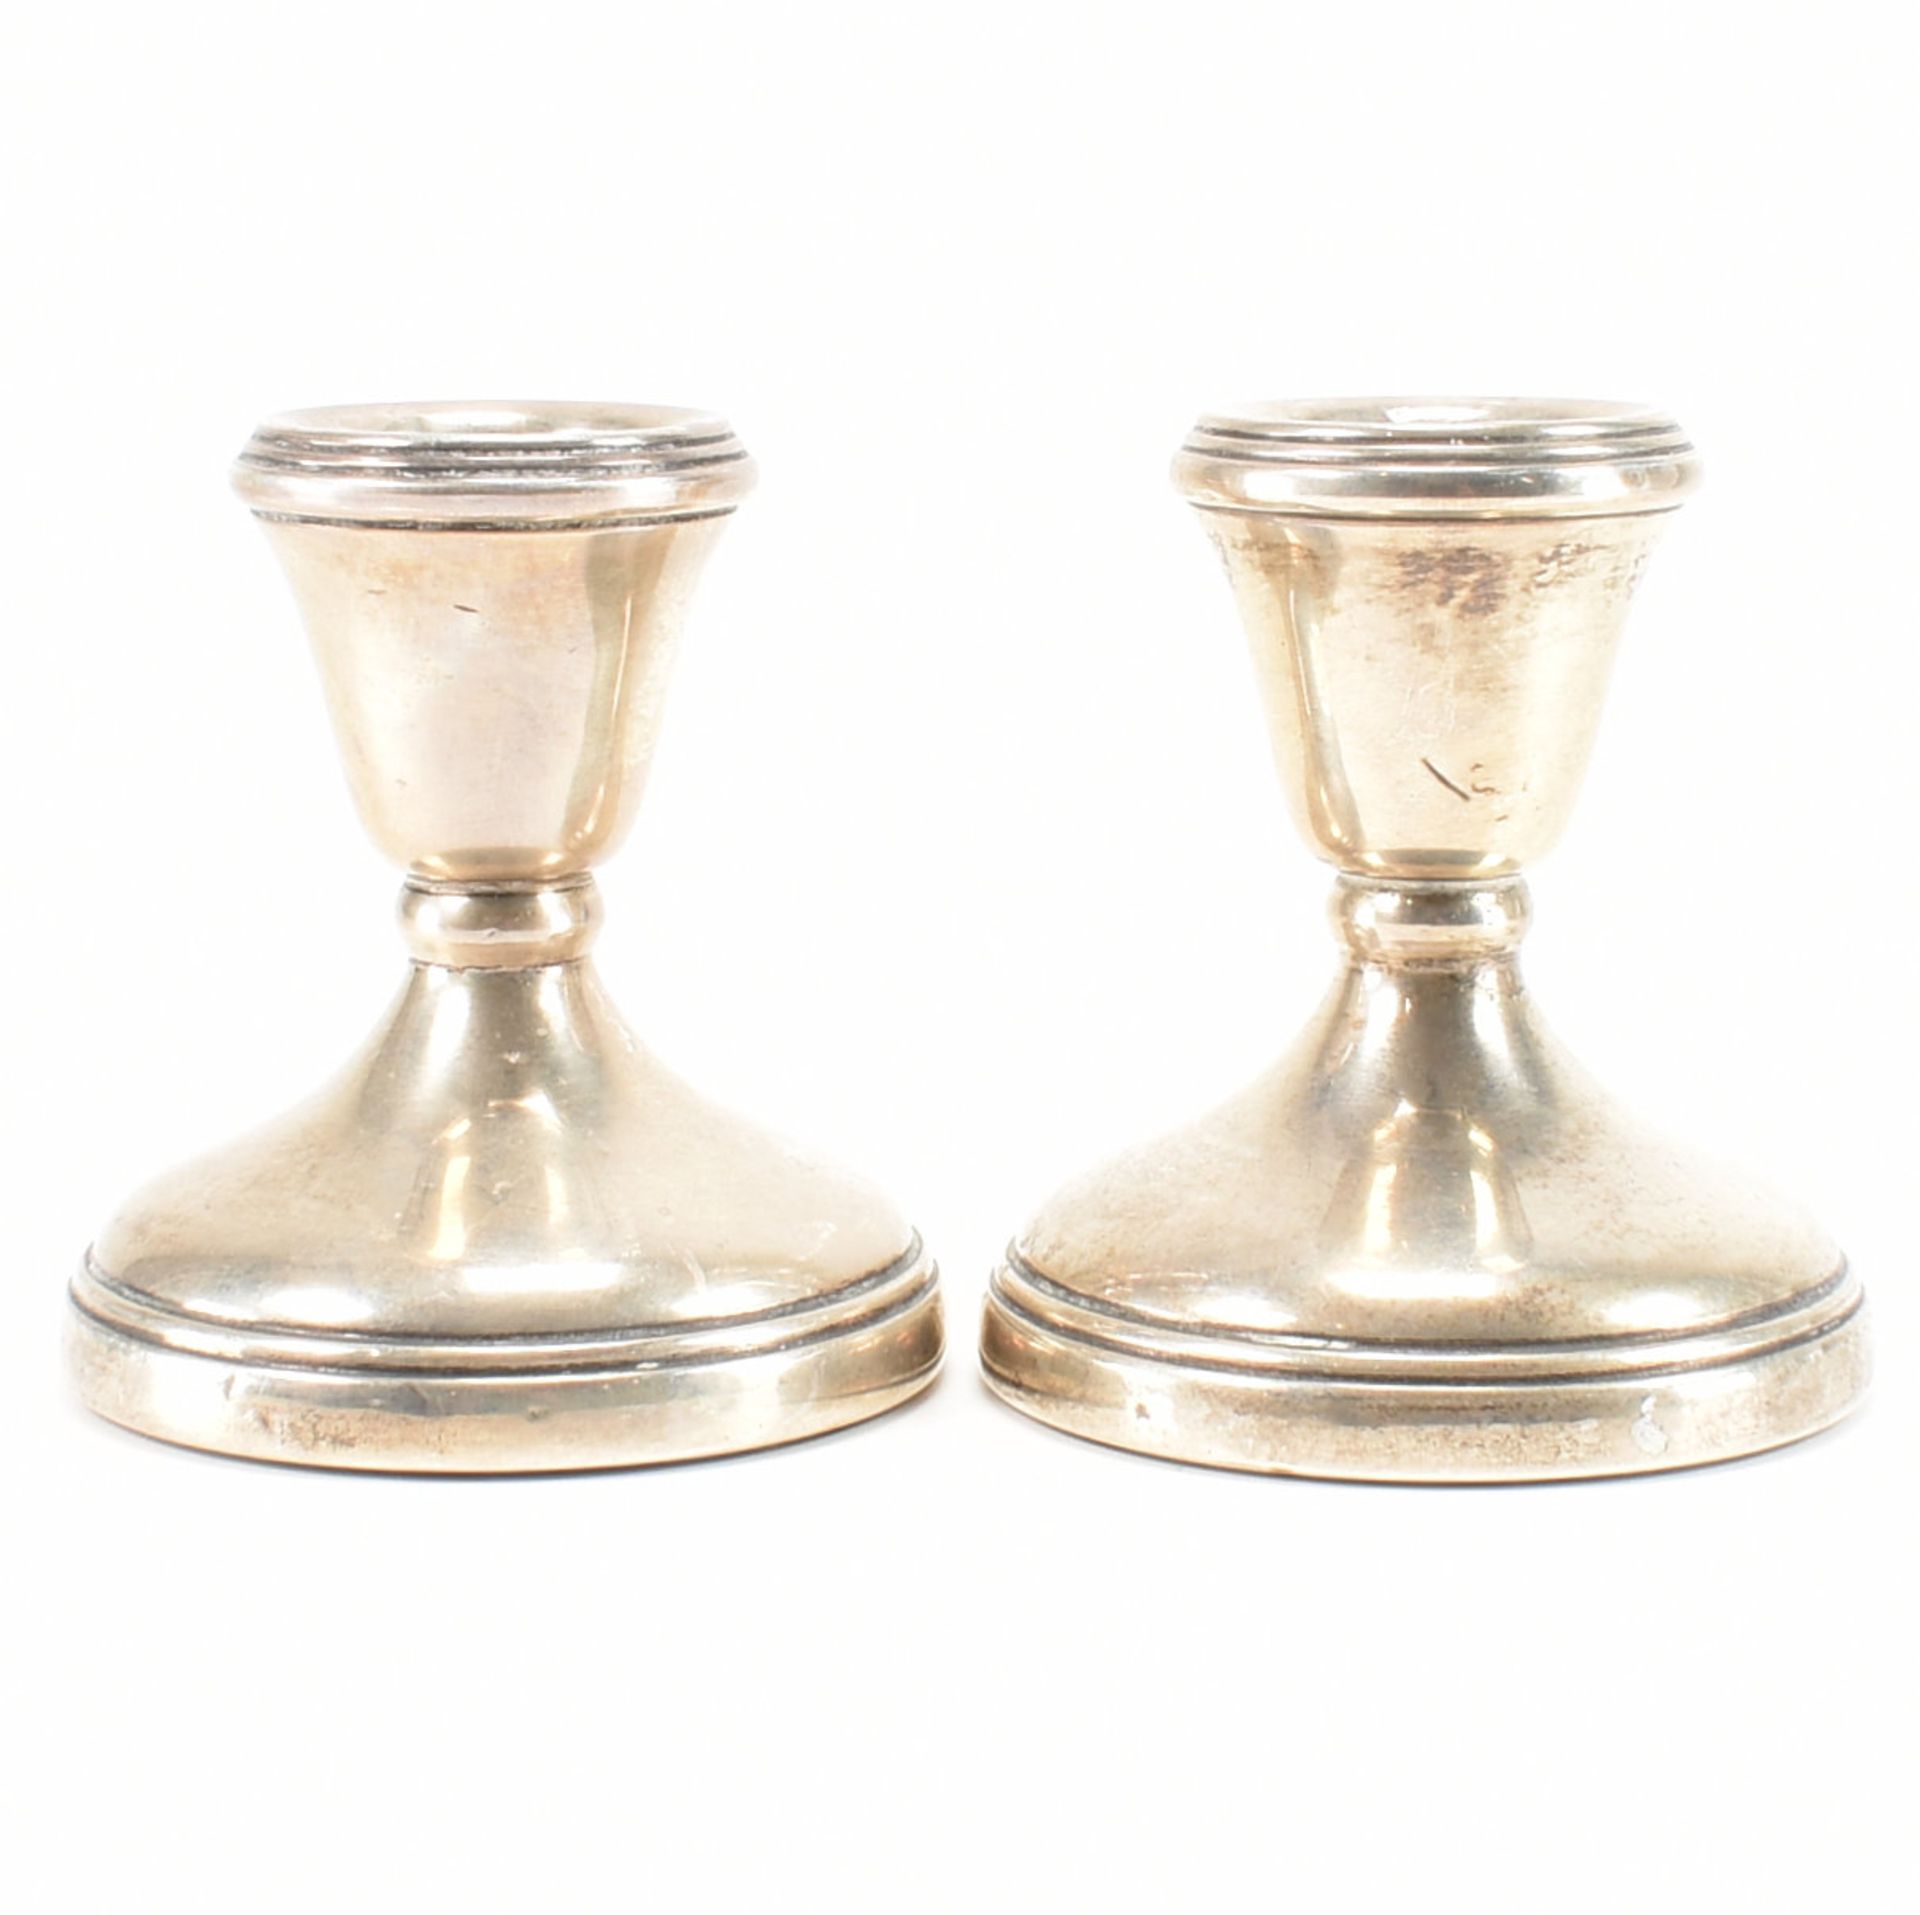 PAIR OF HALLMARKED SILVER CANDLE STICKS